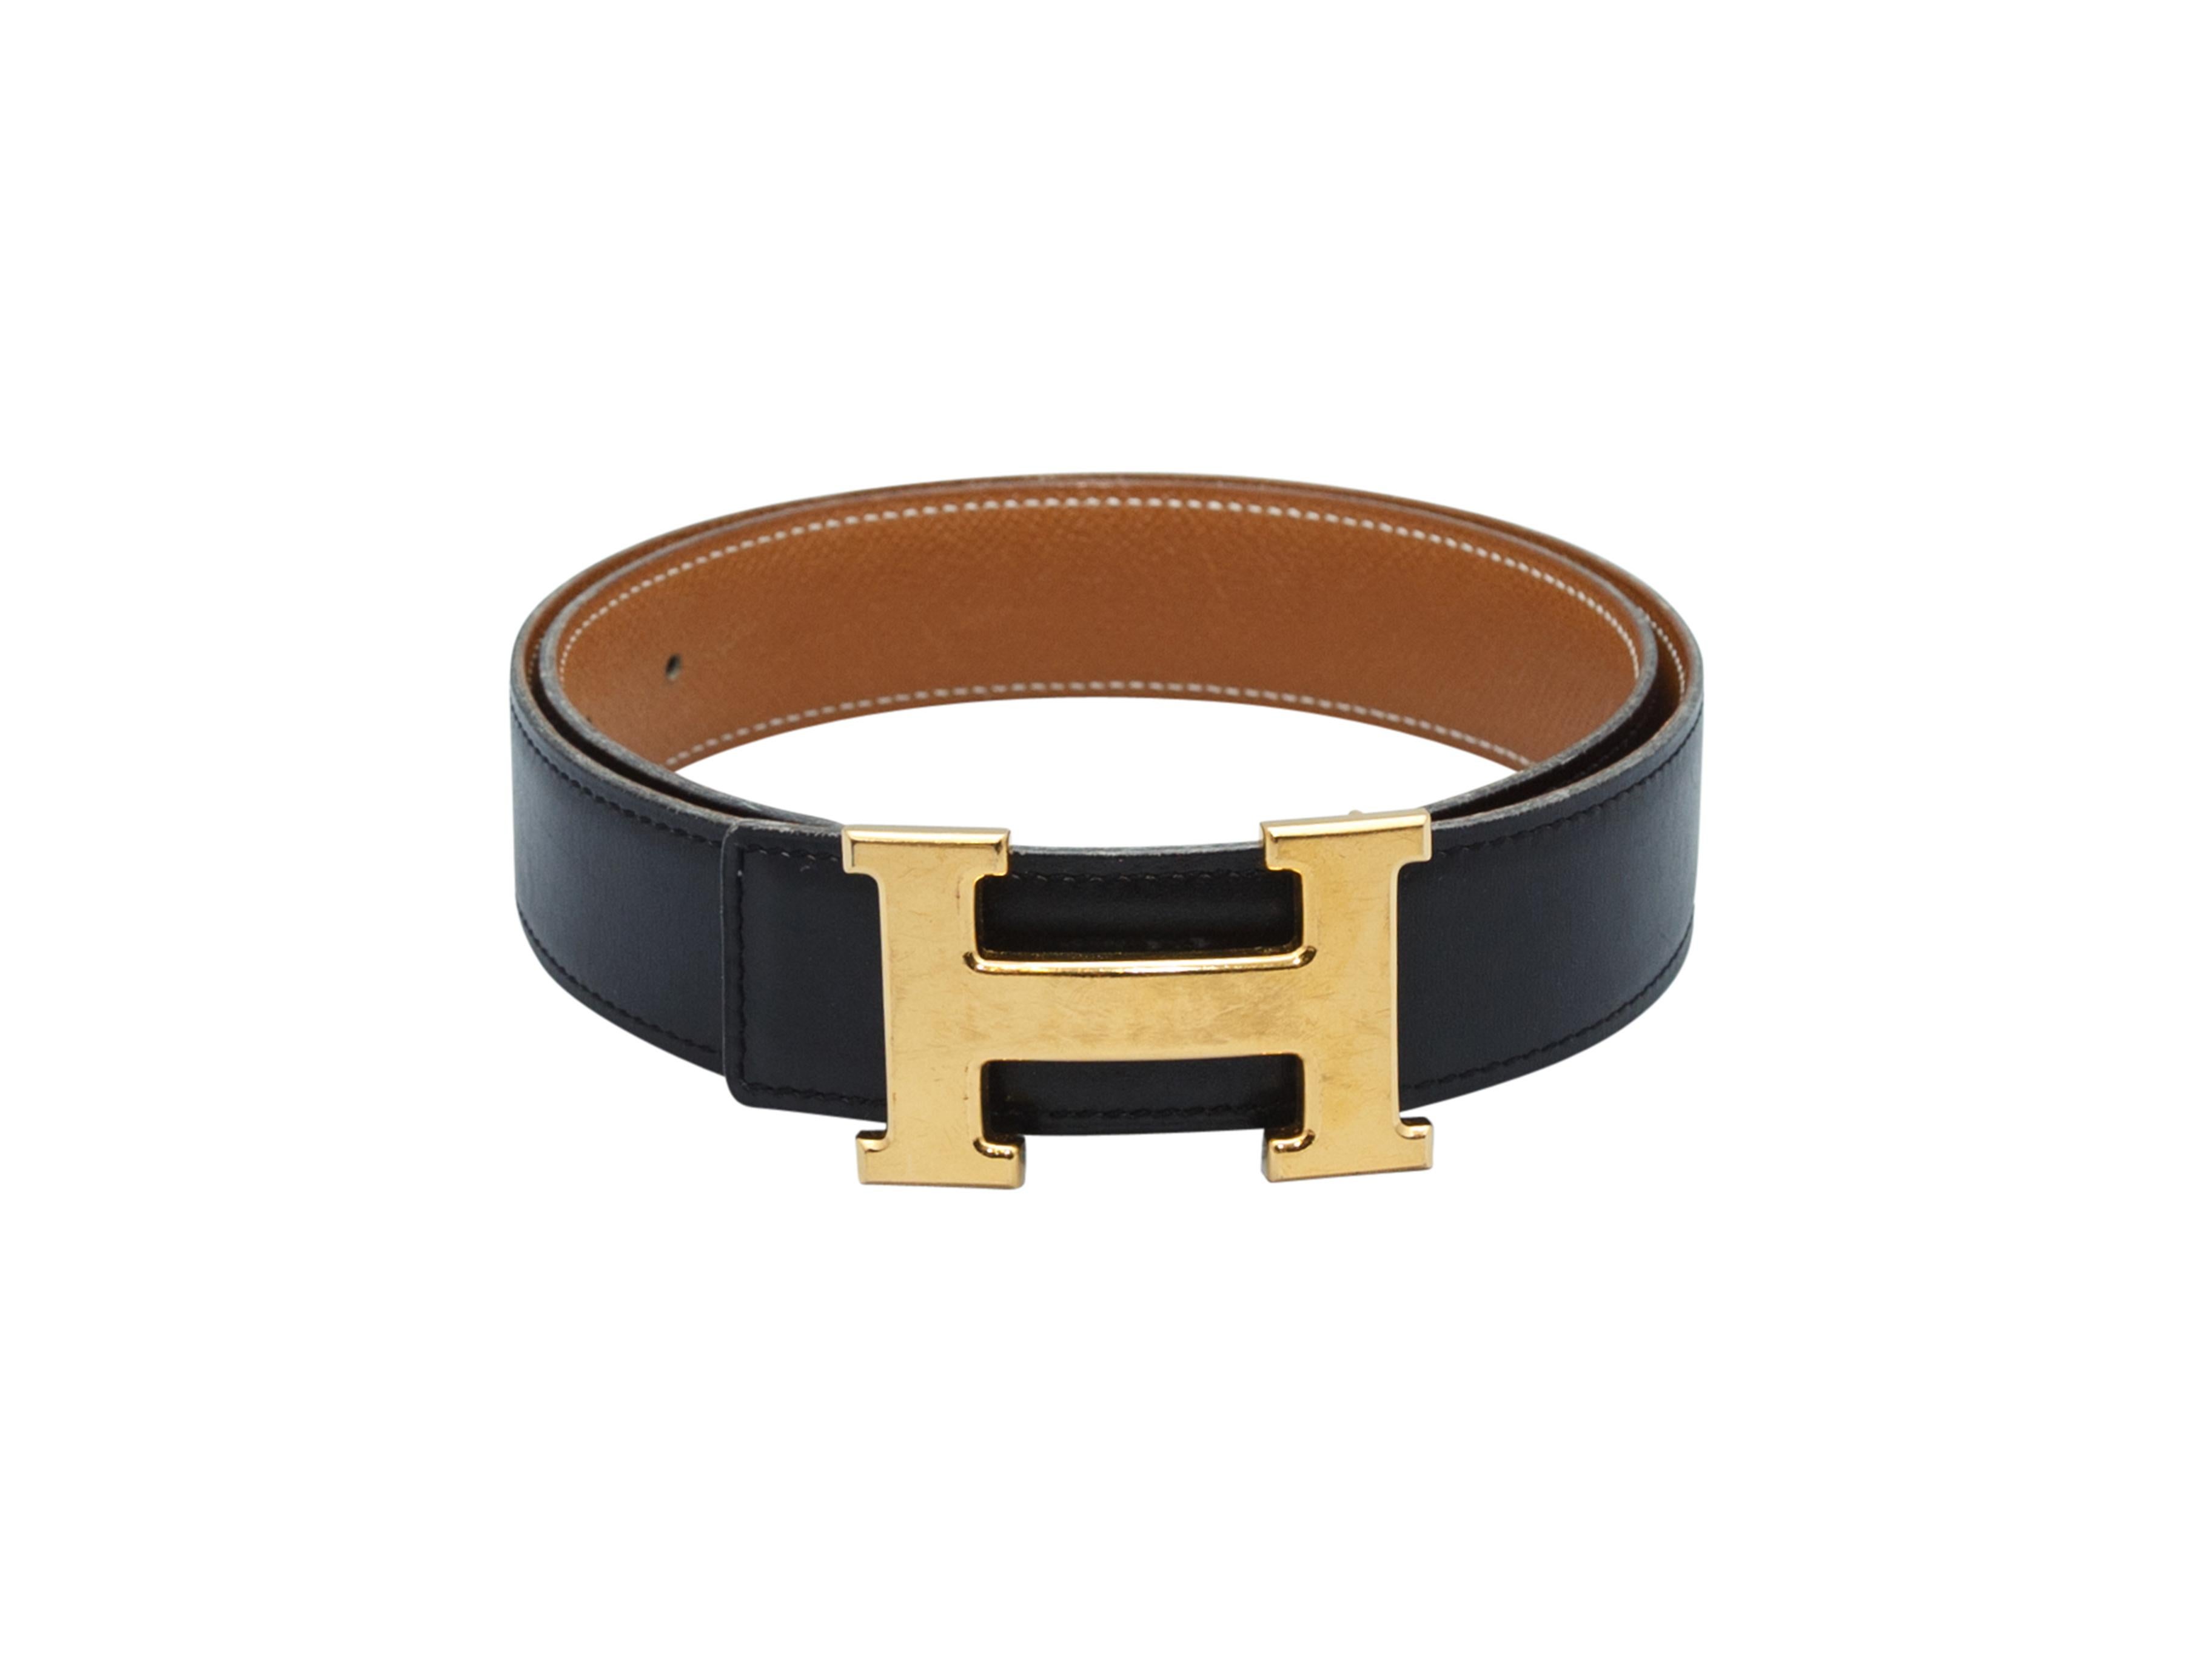 Product details: Black leather belt by Hermes. Large gold-tone H buckle closure at front. 36